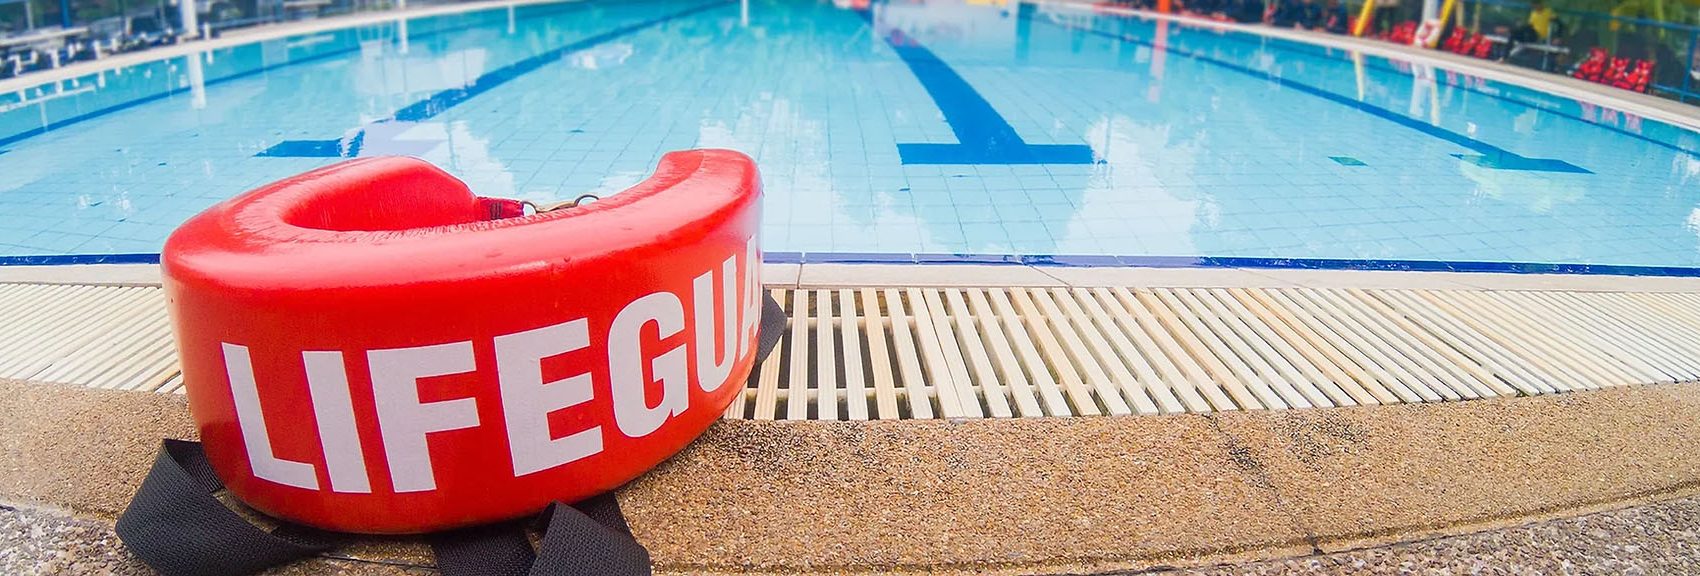 Photo of a lifeguard flotation device by the pool.